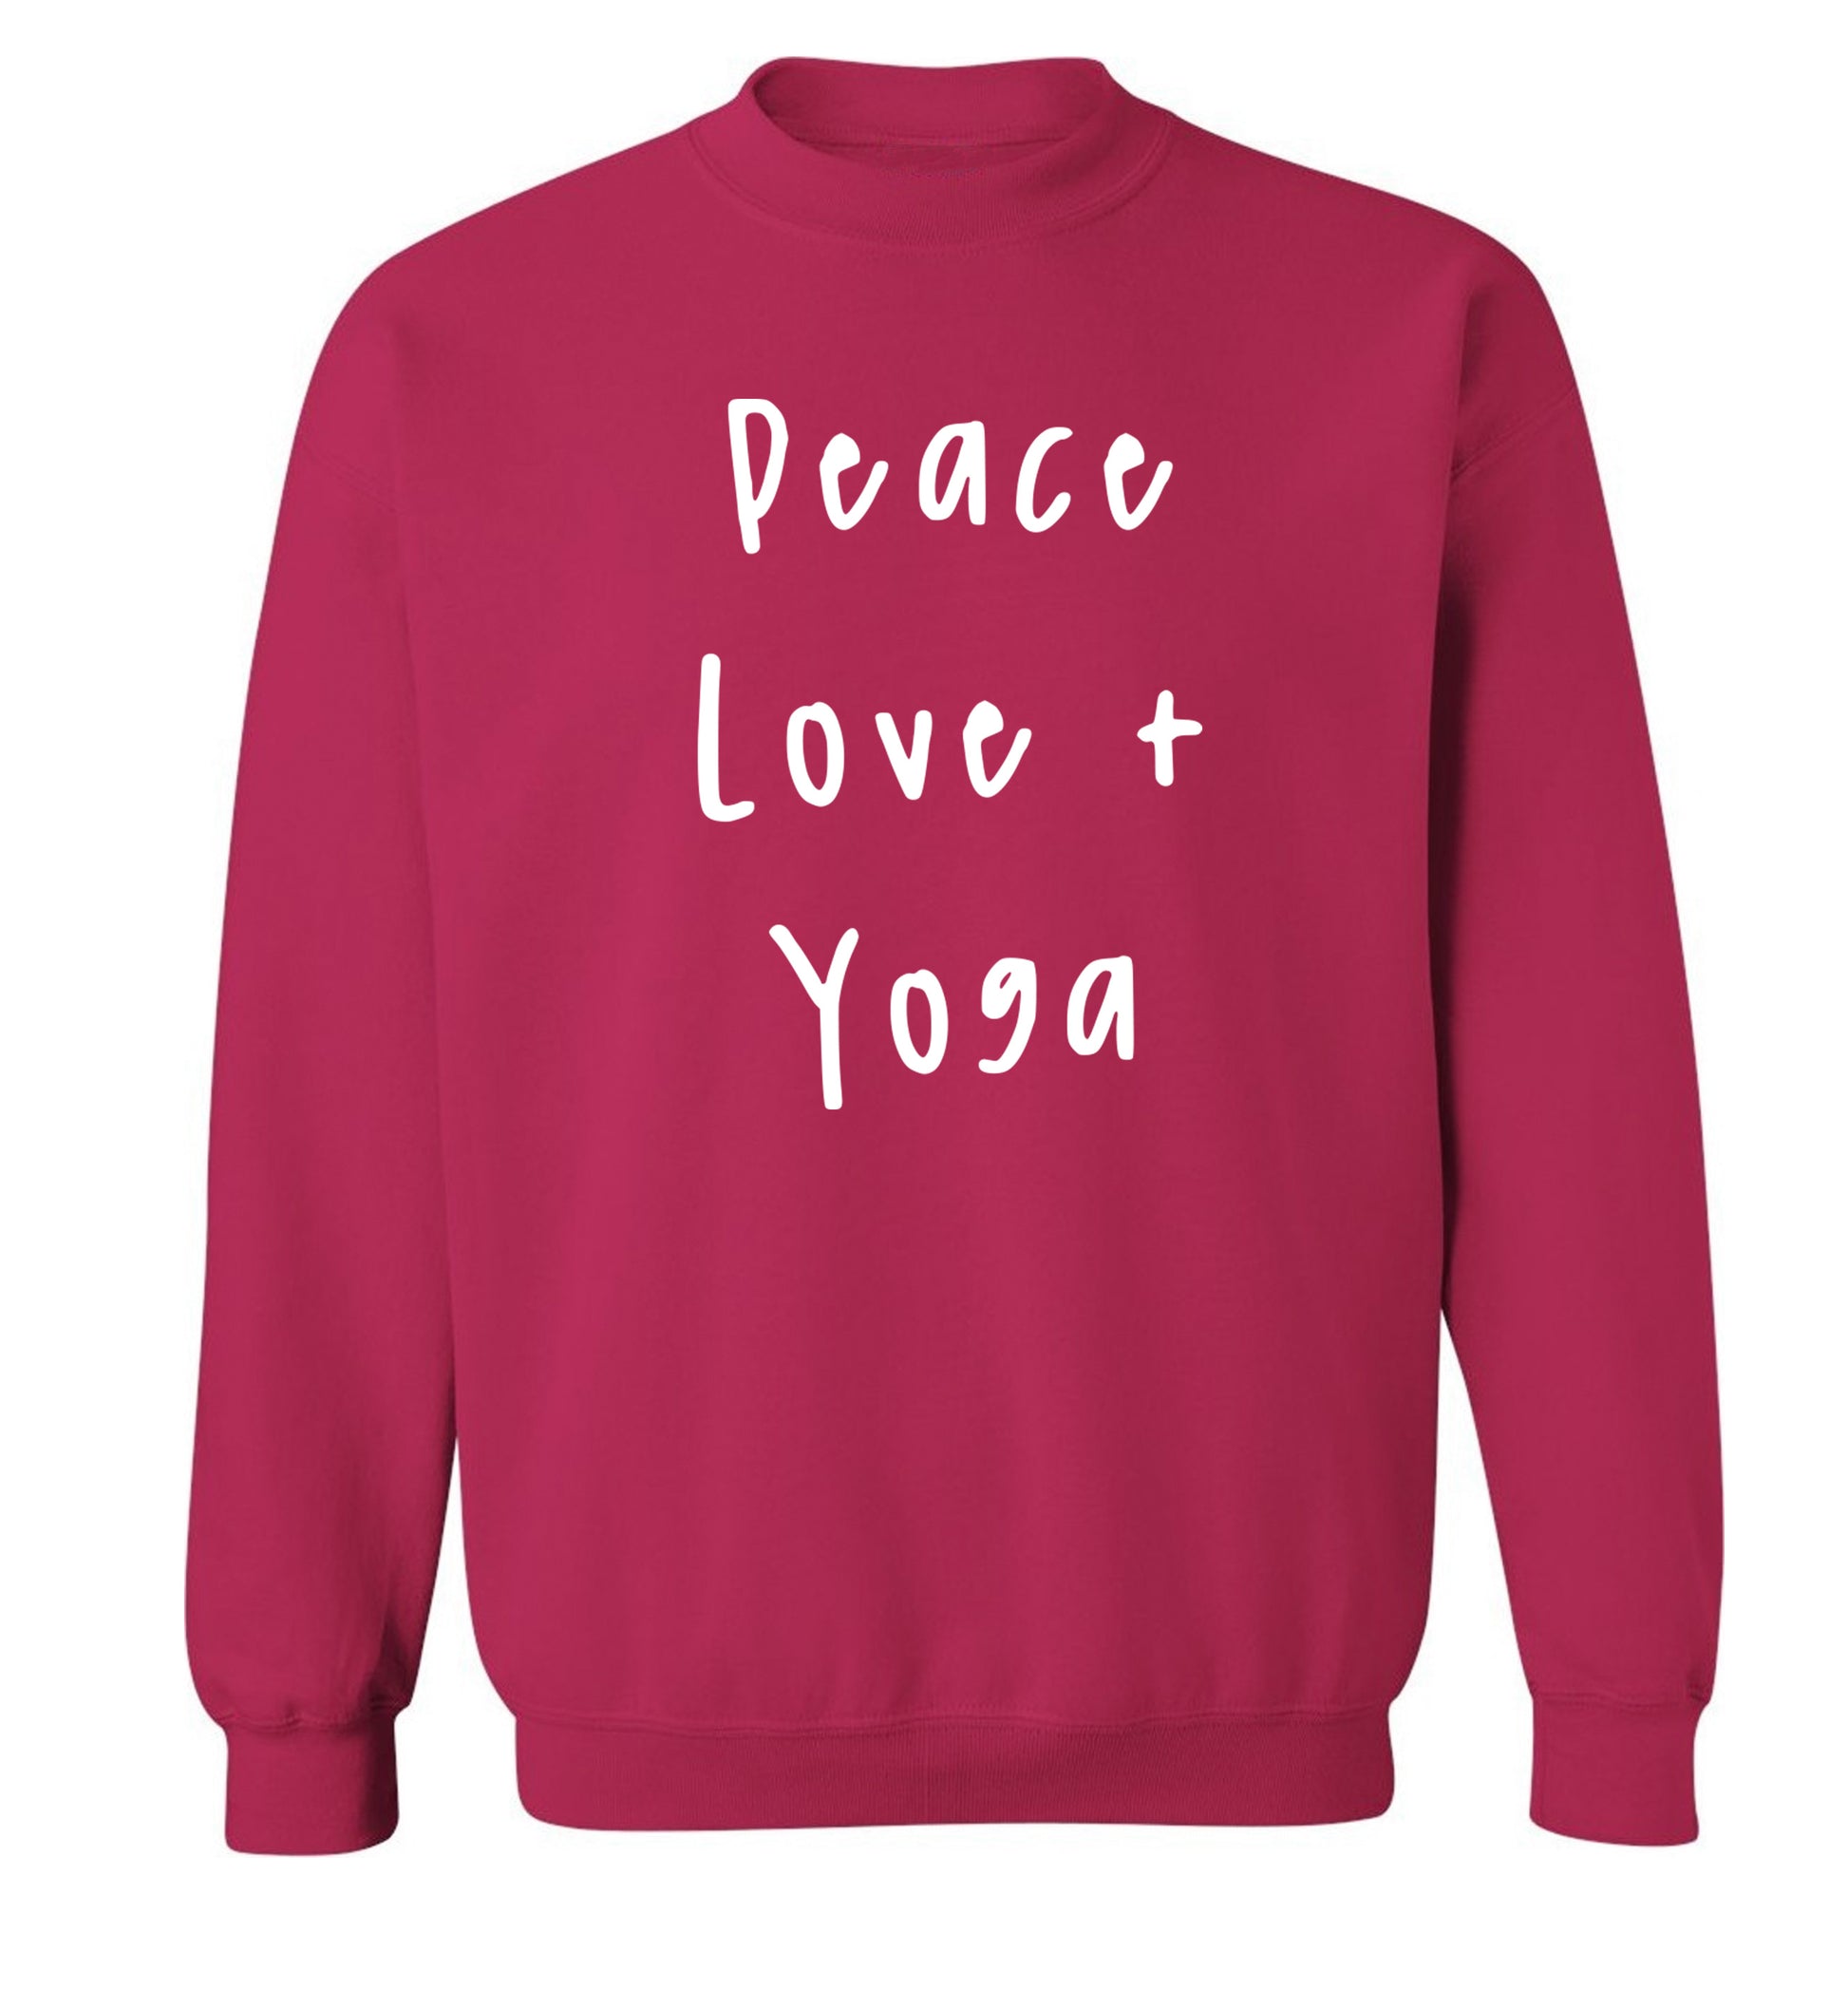 Peace love and yoga Adult's unisex pink Sweater 2XL